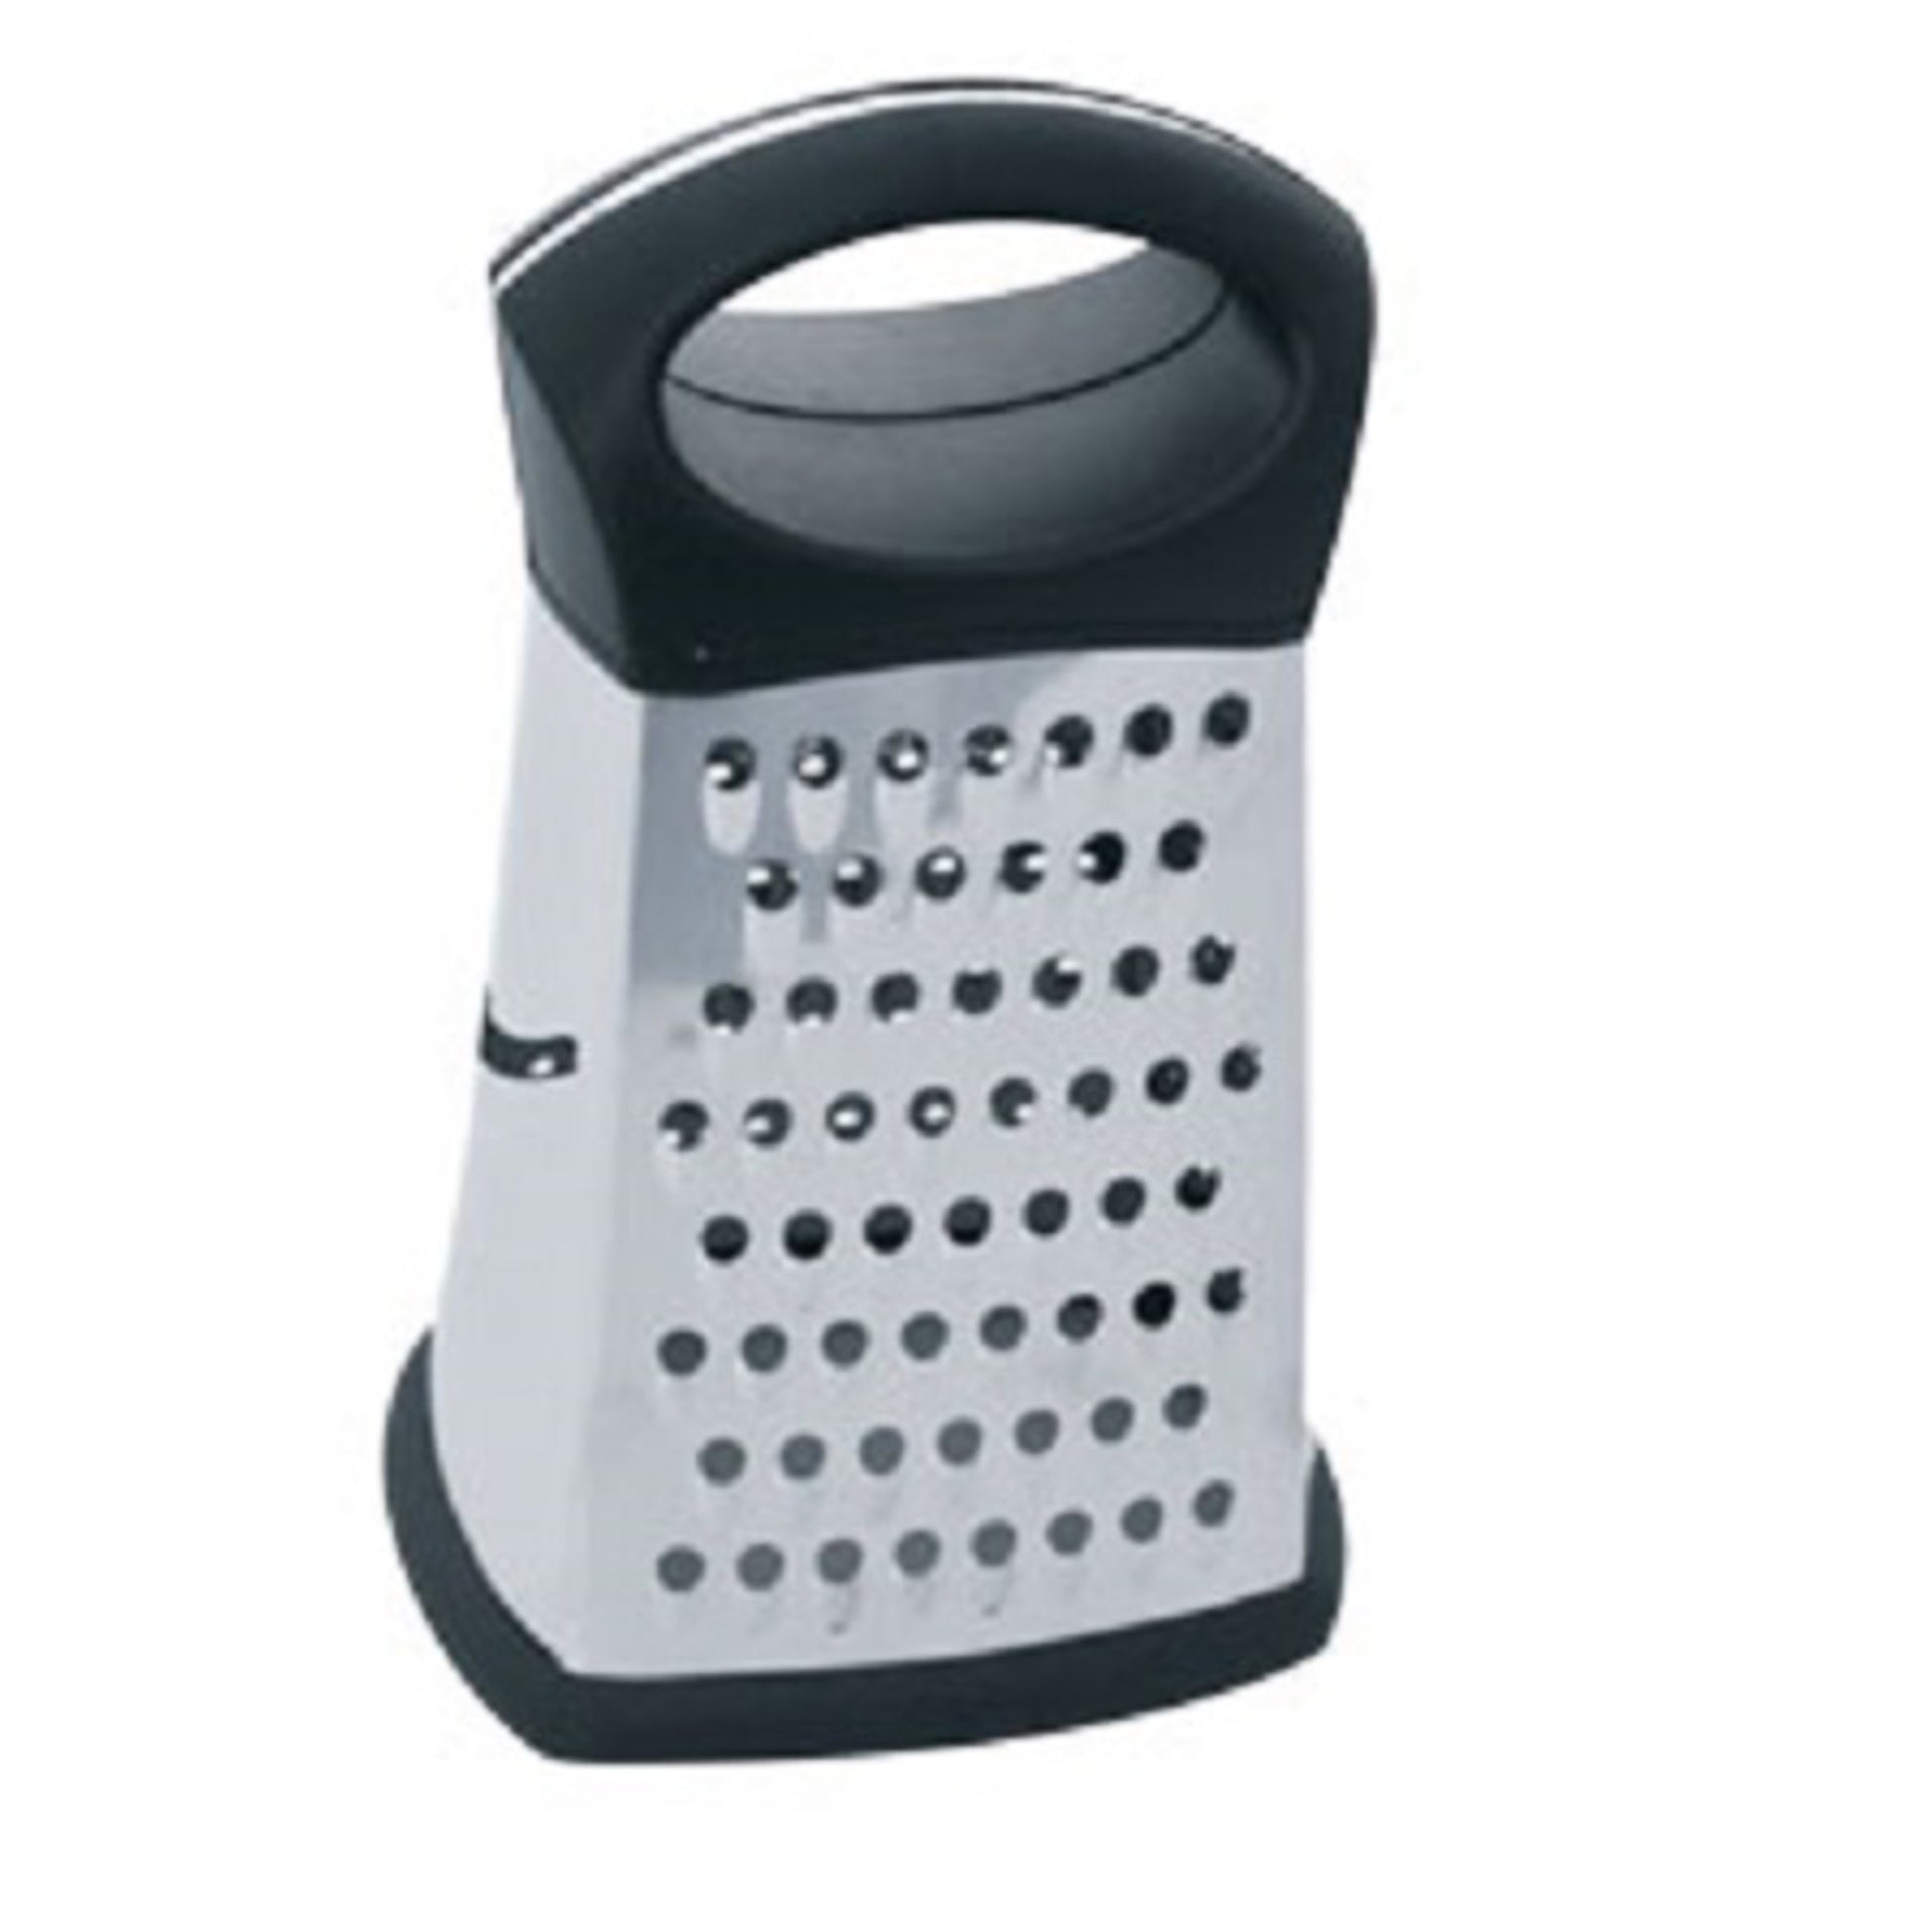 Symple Stuff Debbie Stainless Steel Cheese Grater with Storage